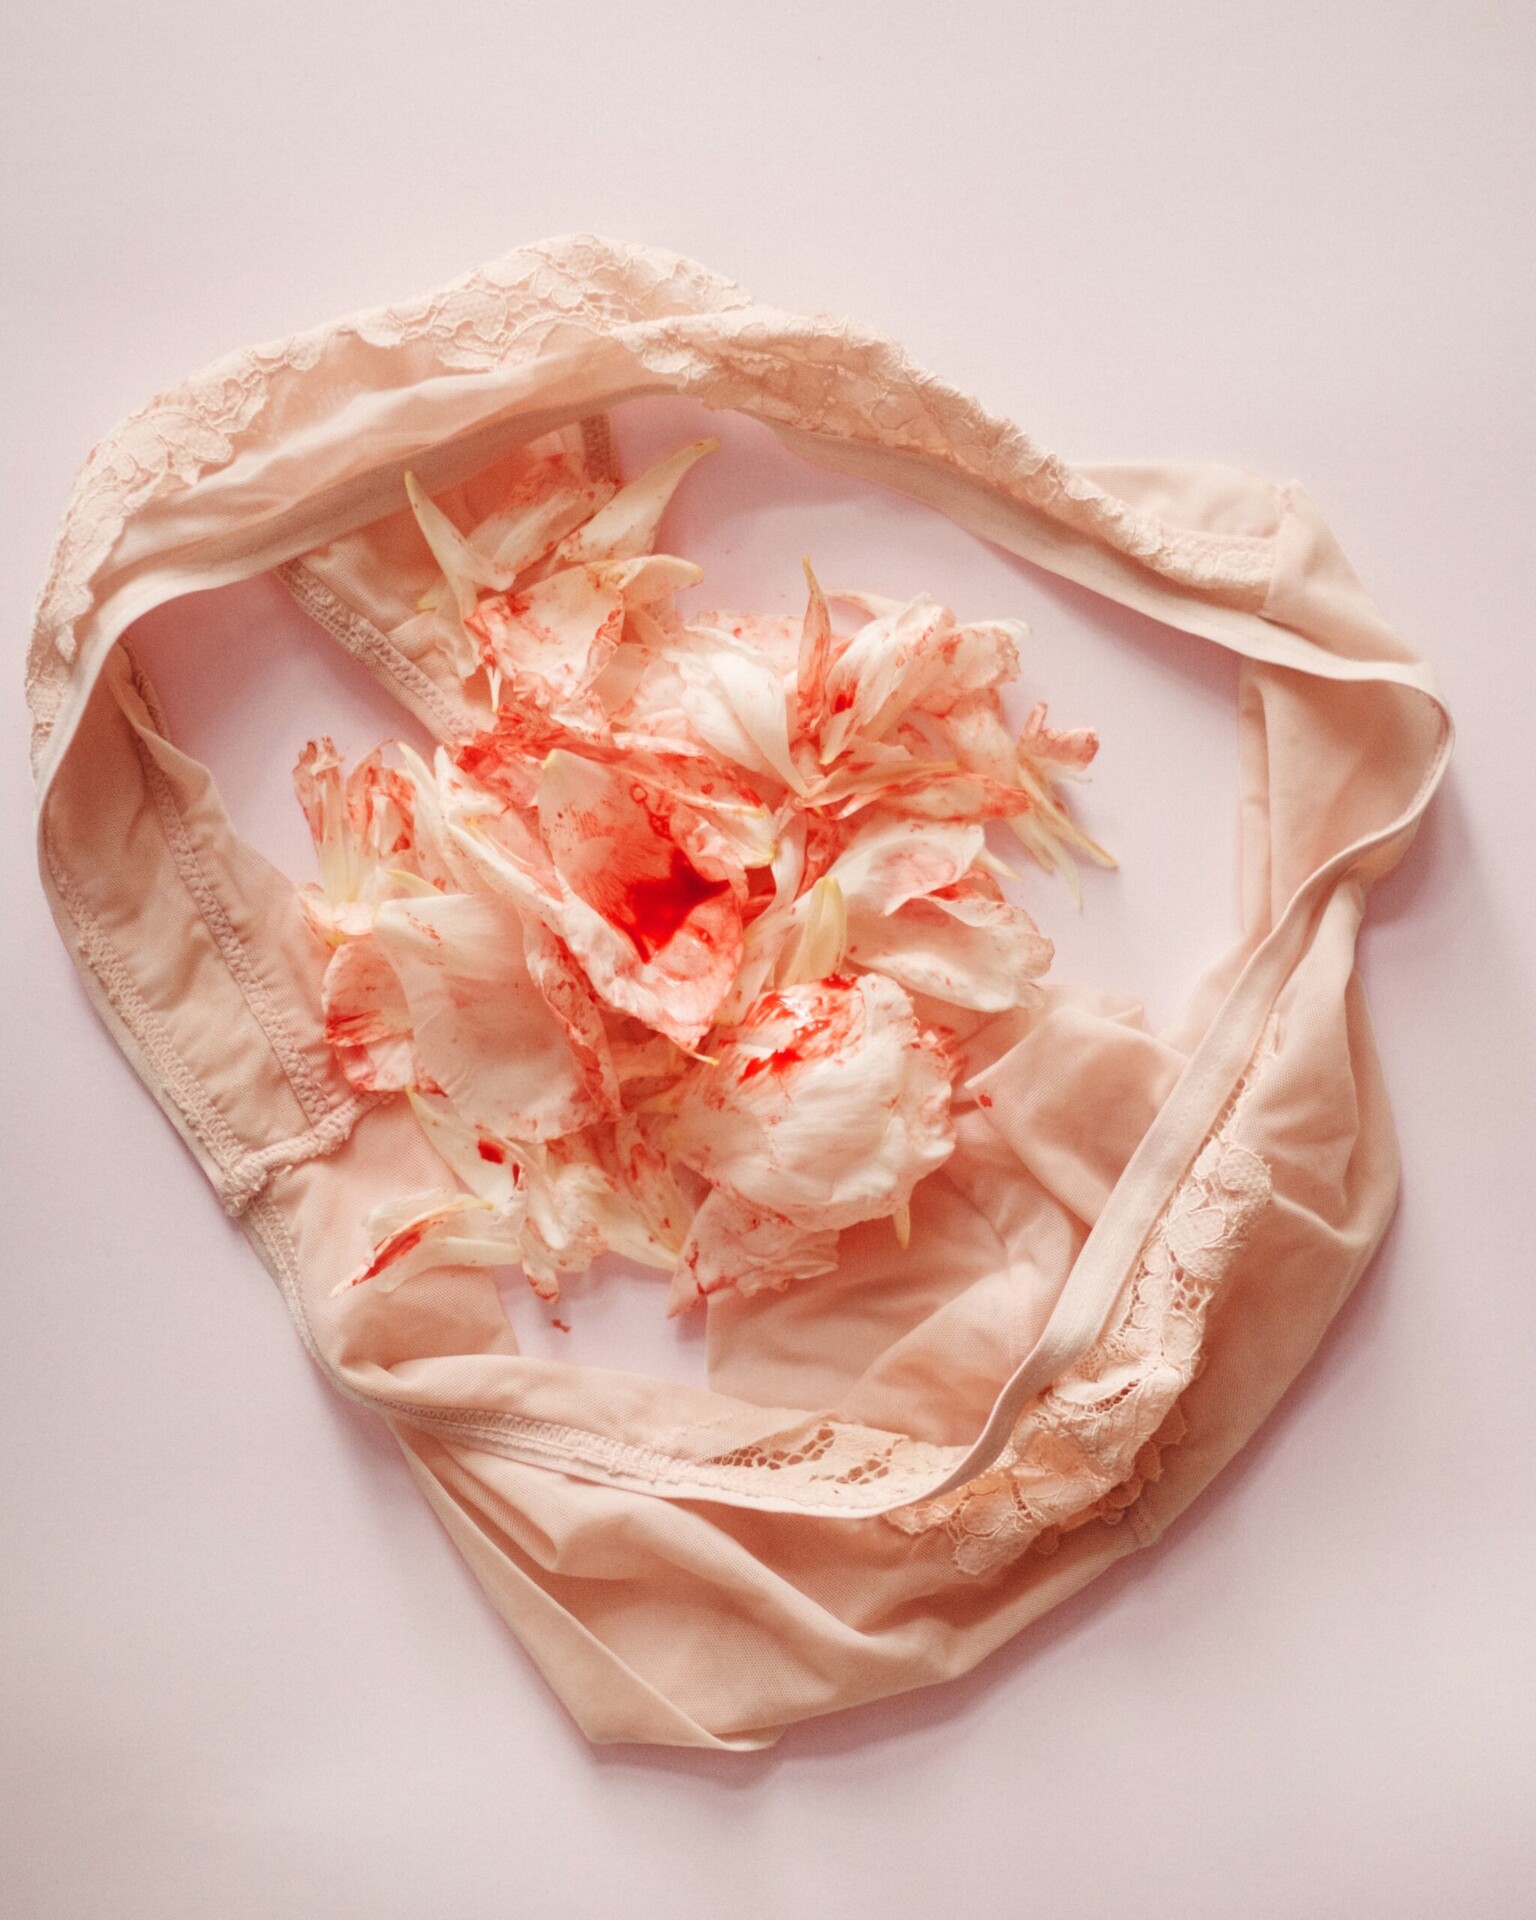 women's underwear stained with period blood clots